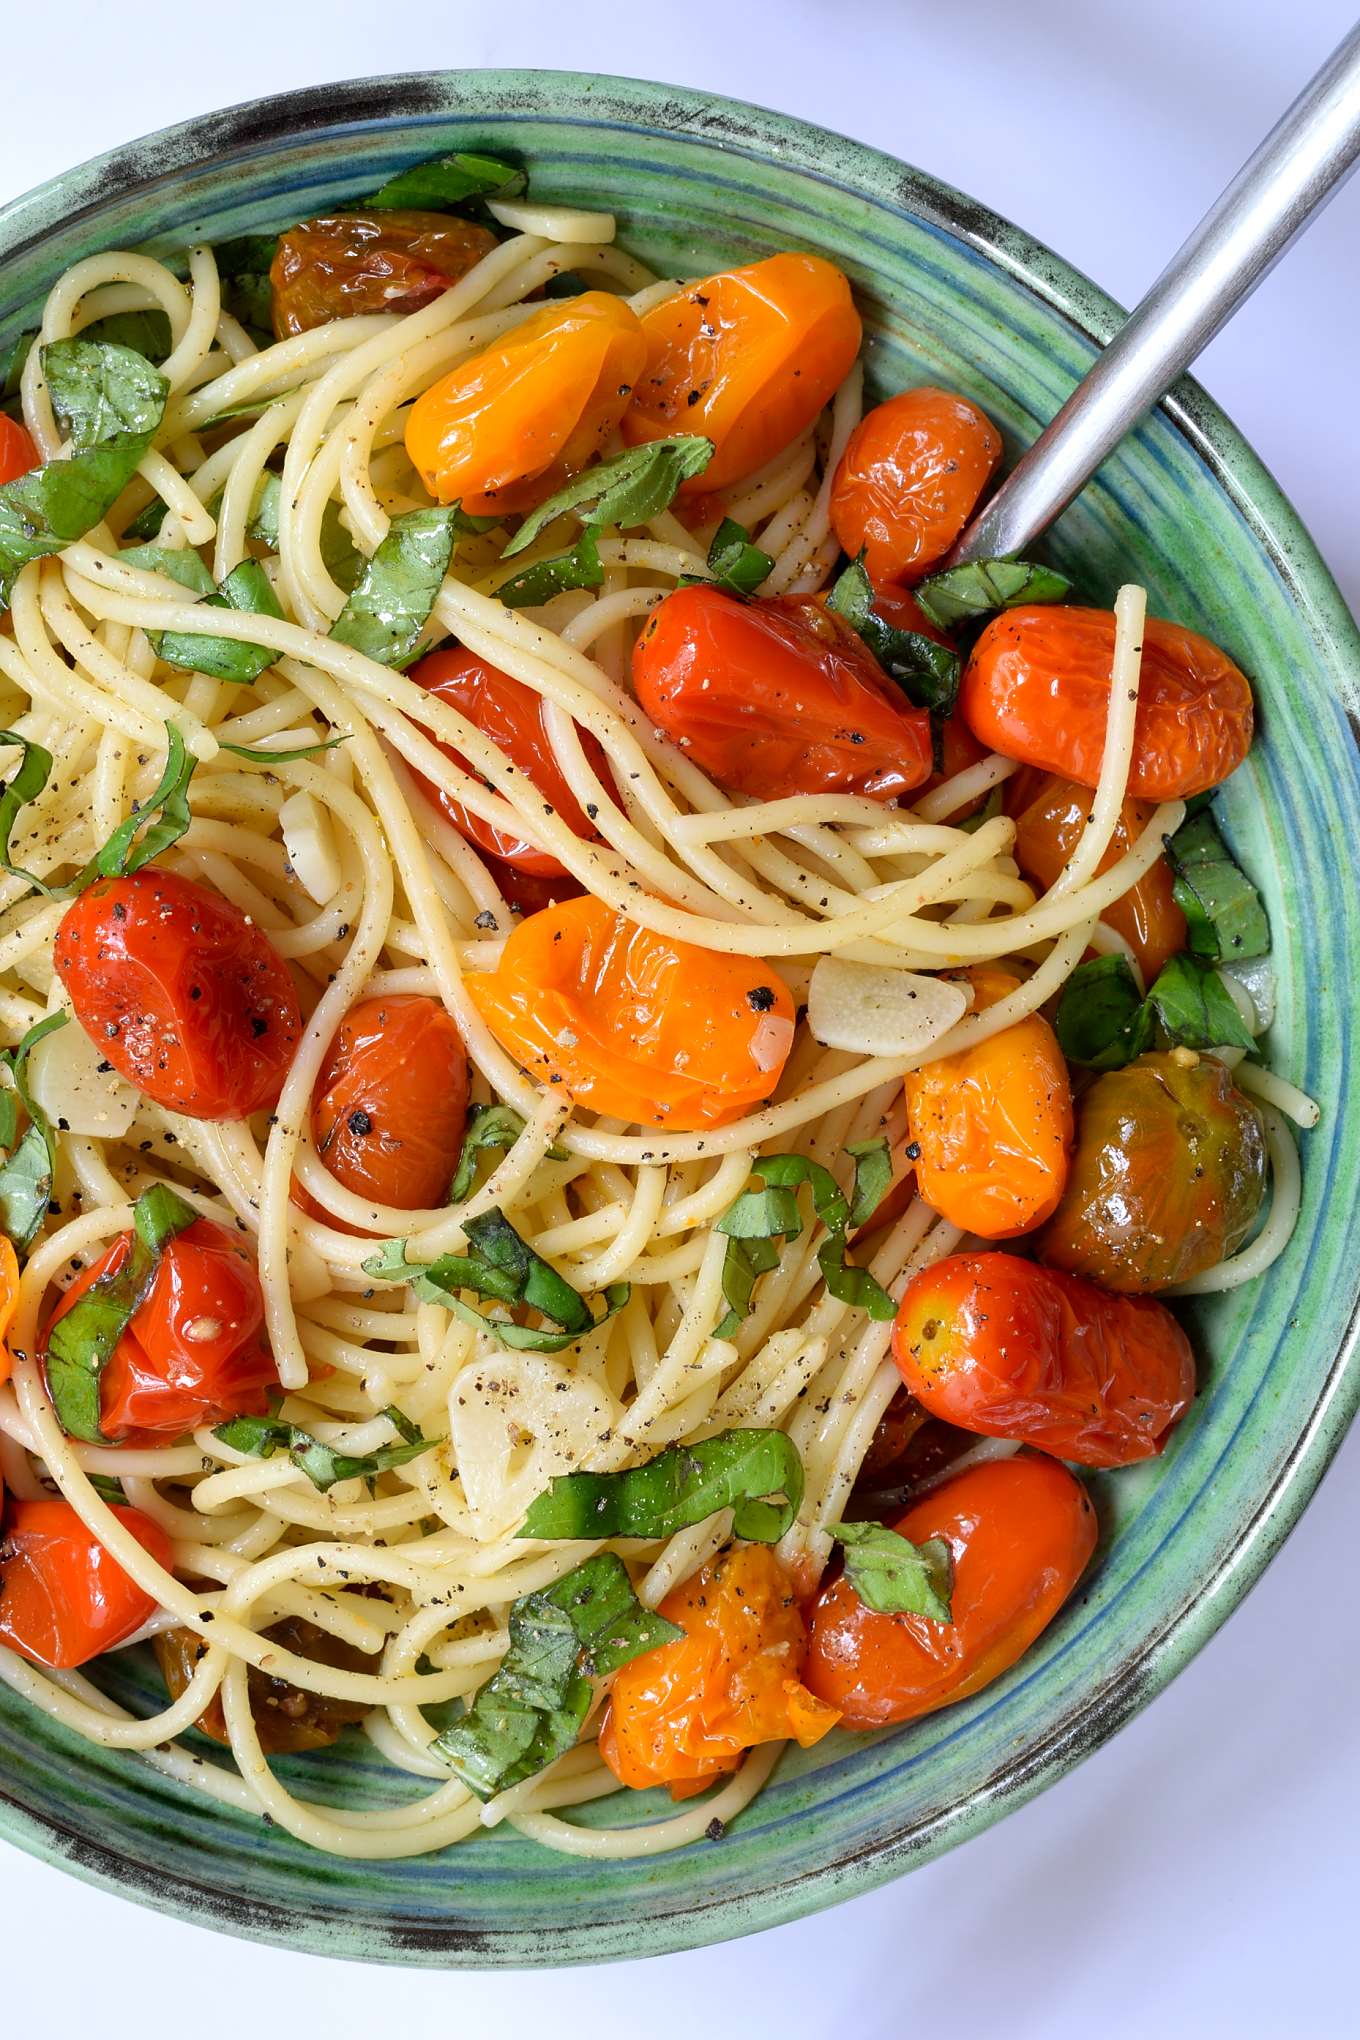 This recipe for vegan roasted tomato pasta with garlic and basil is so easy it could go under the category of cooking for dummies. Go ahead and try to stuff it up, I dare you. You’ll need a grand total of seven ingredients and just twenty-five minutes to get this simple and colourful dish on the table.